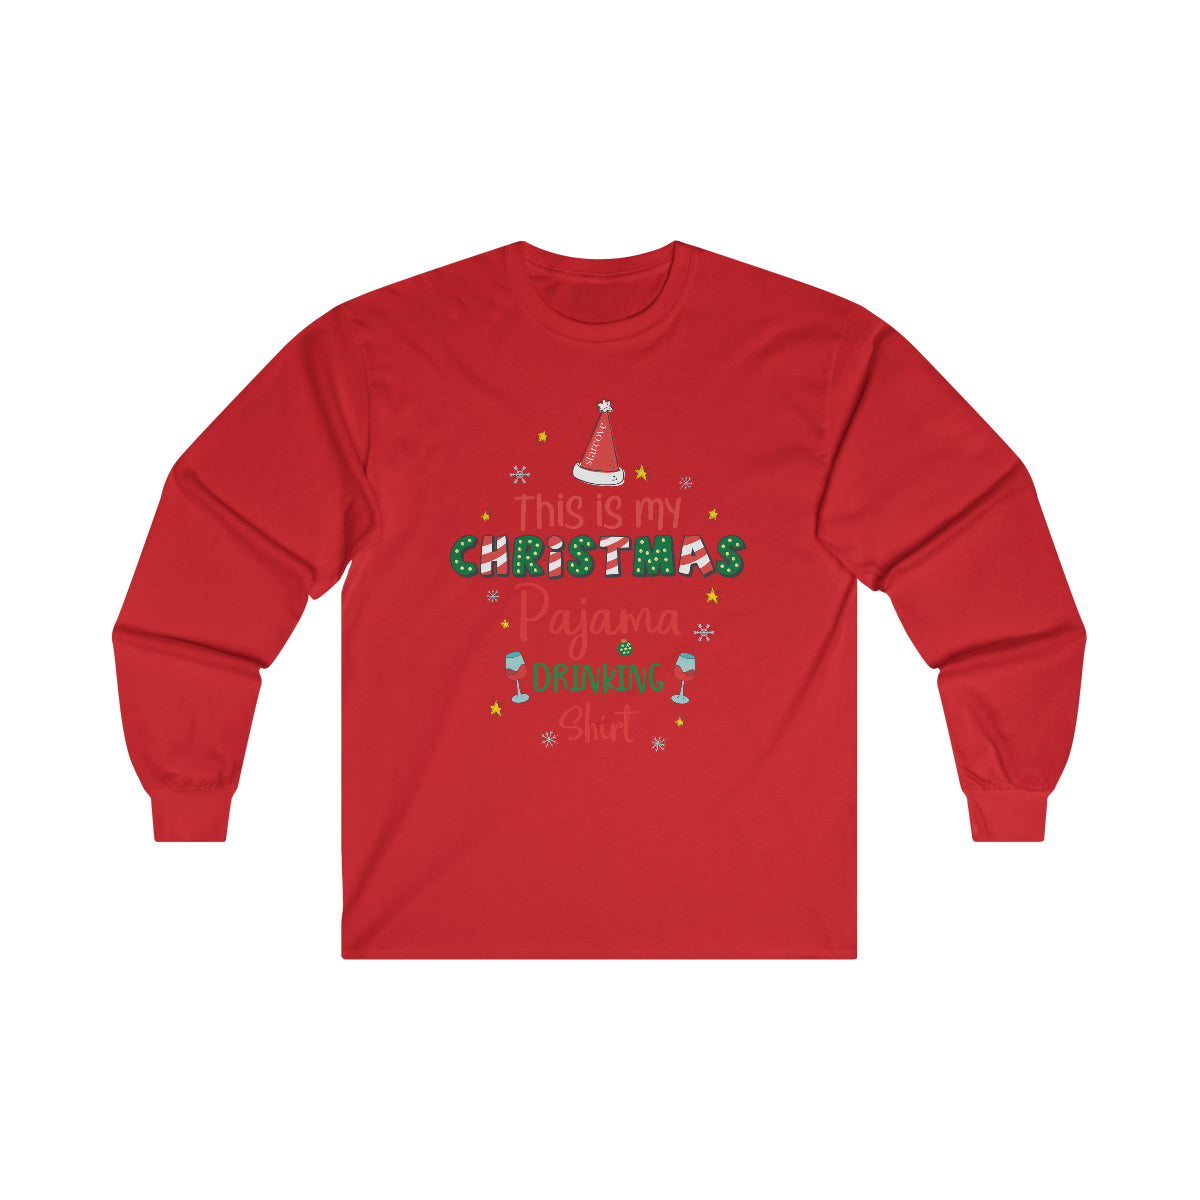 This is My Christmas Pajama Drinking Shirt, Funny Family Xmas Party Ugly Wine Eve St Nicolas Men Women Long Sleeve Top Gift Starcove Fashion